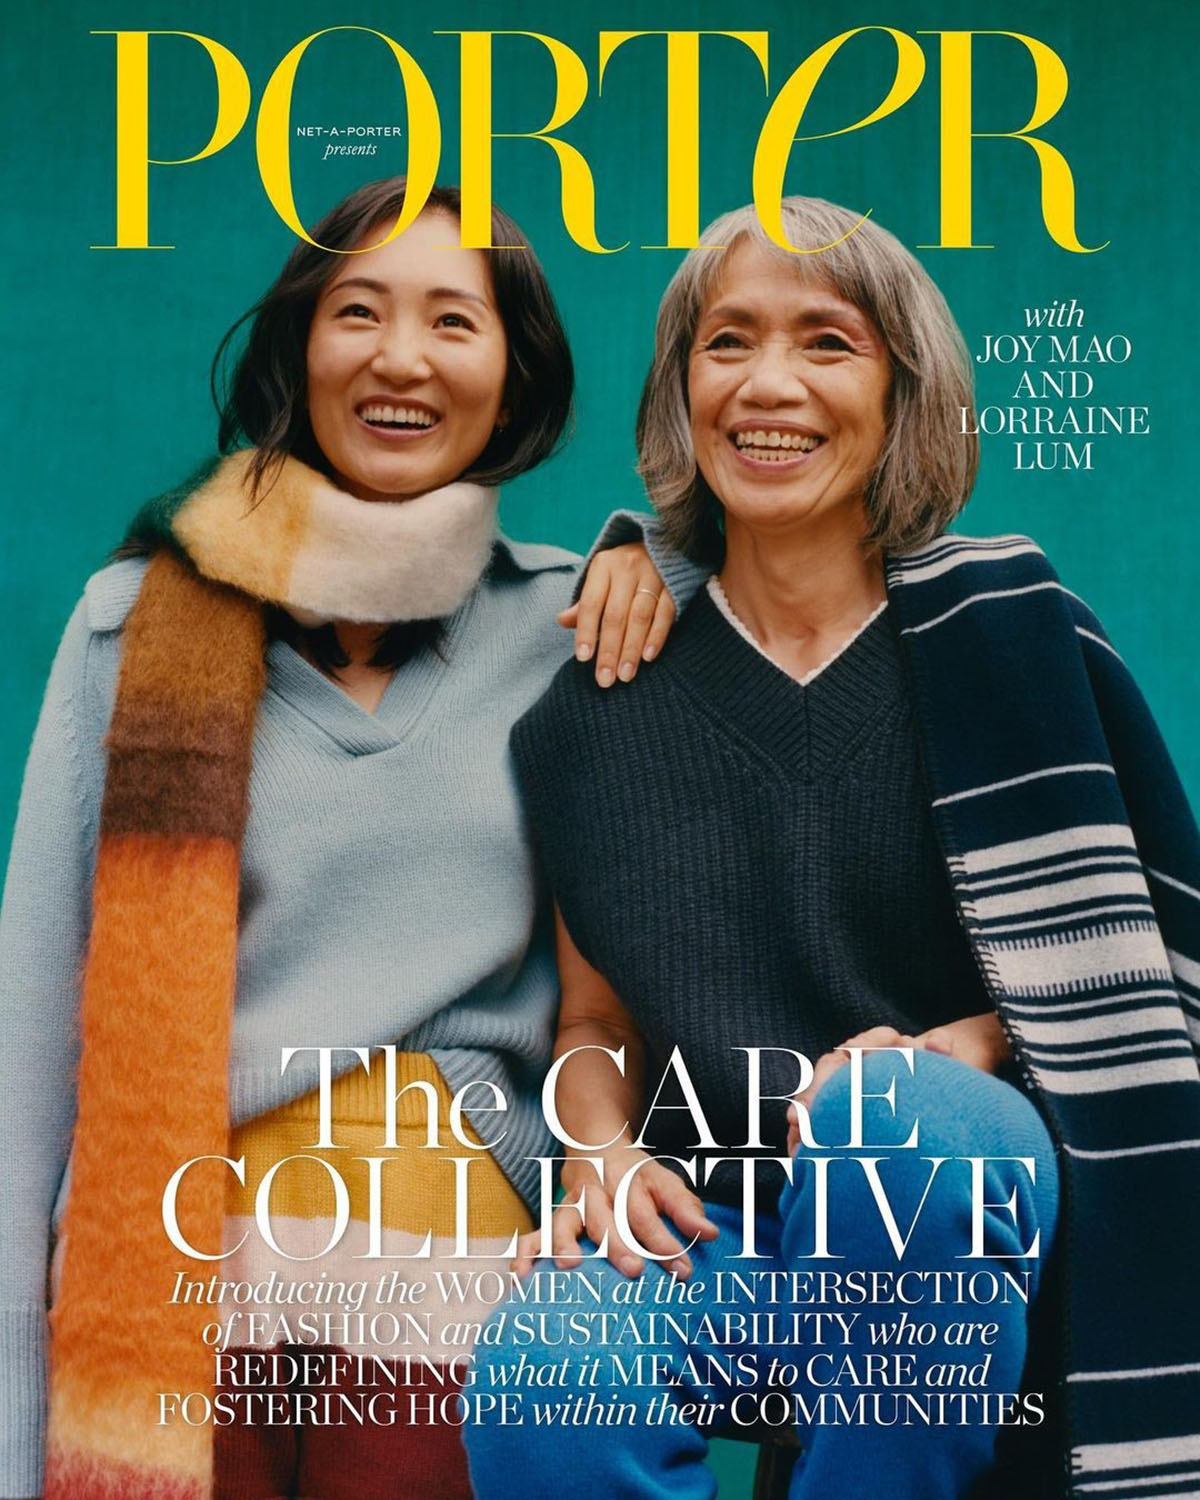 Porter Magazine August 23rd, 2021 covers by Camila Falquez